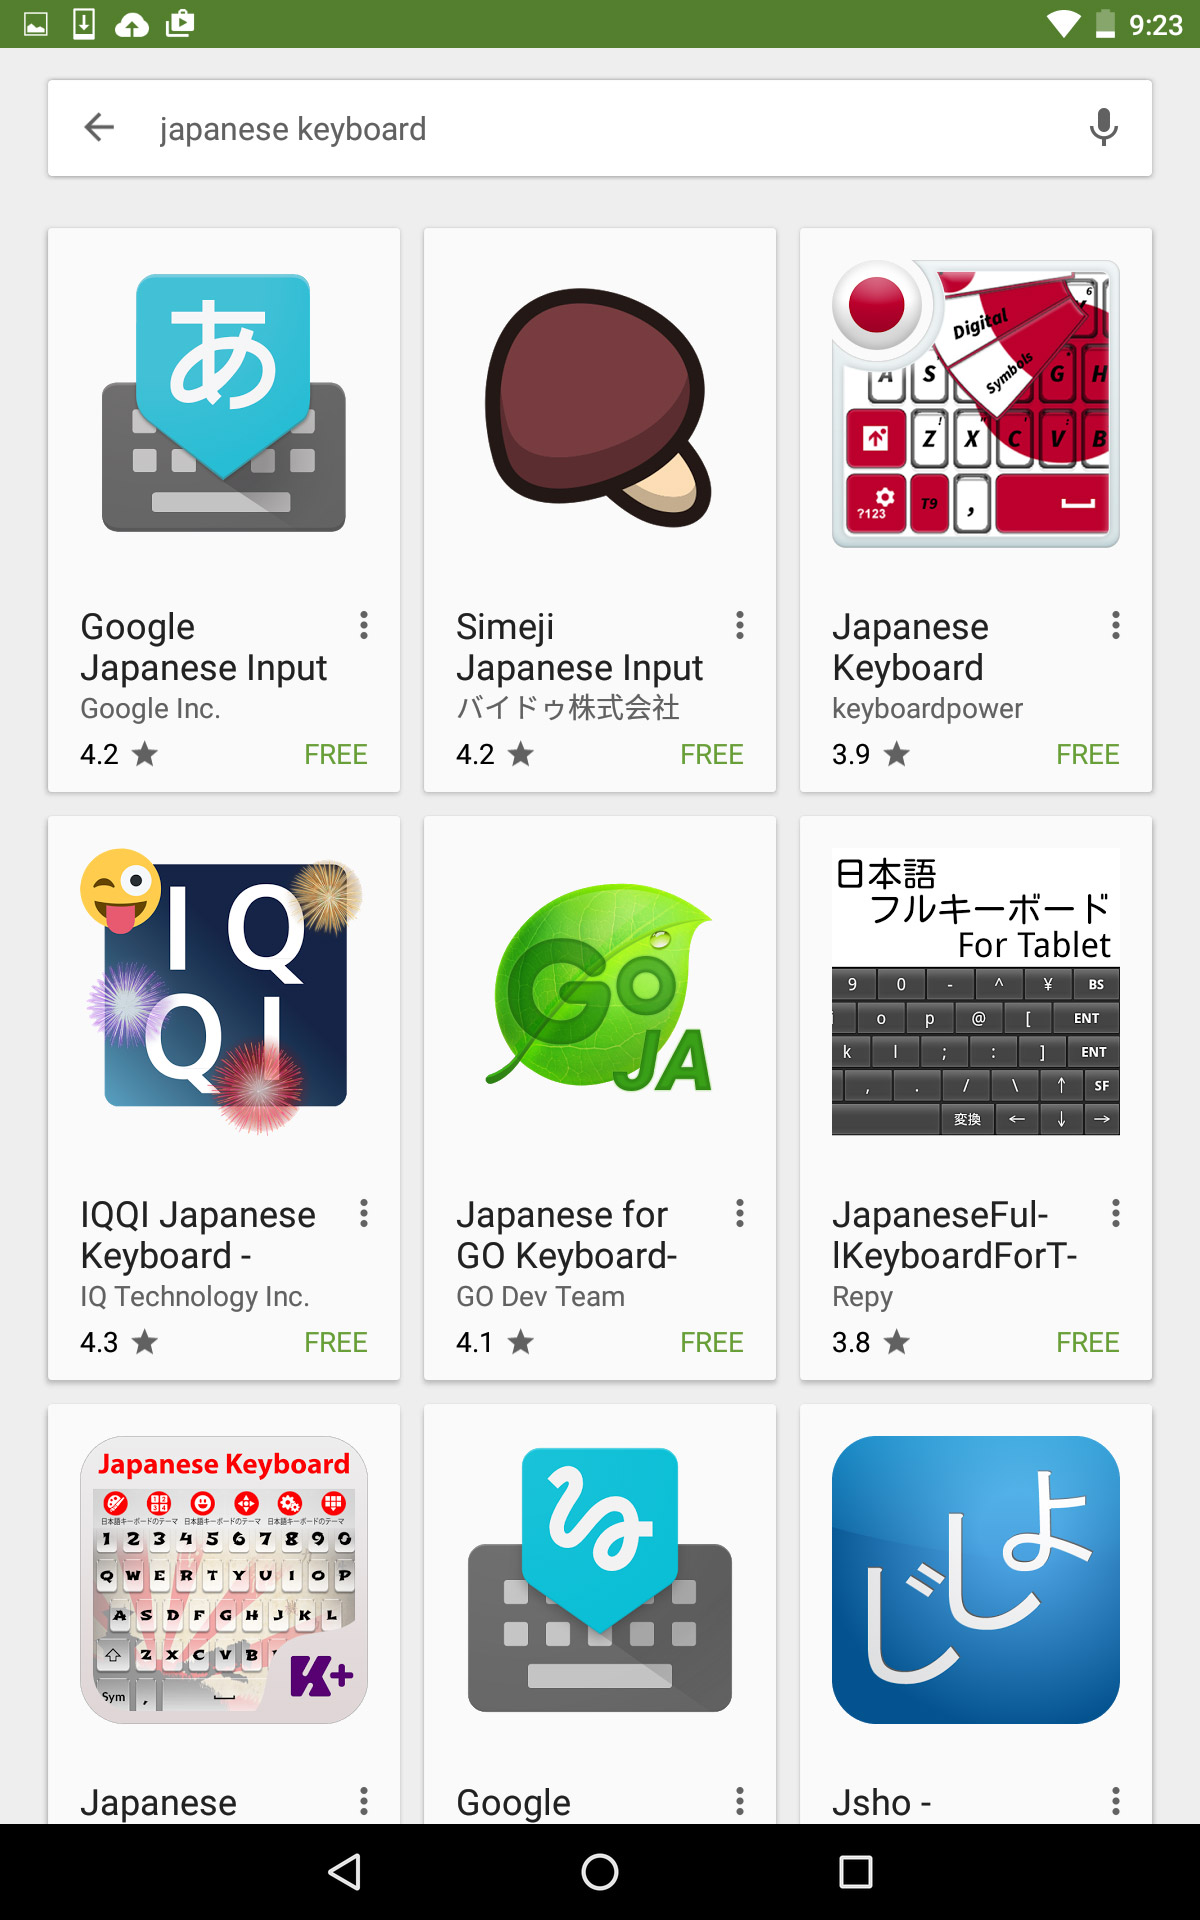 android search results for japanese keyboard